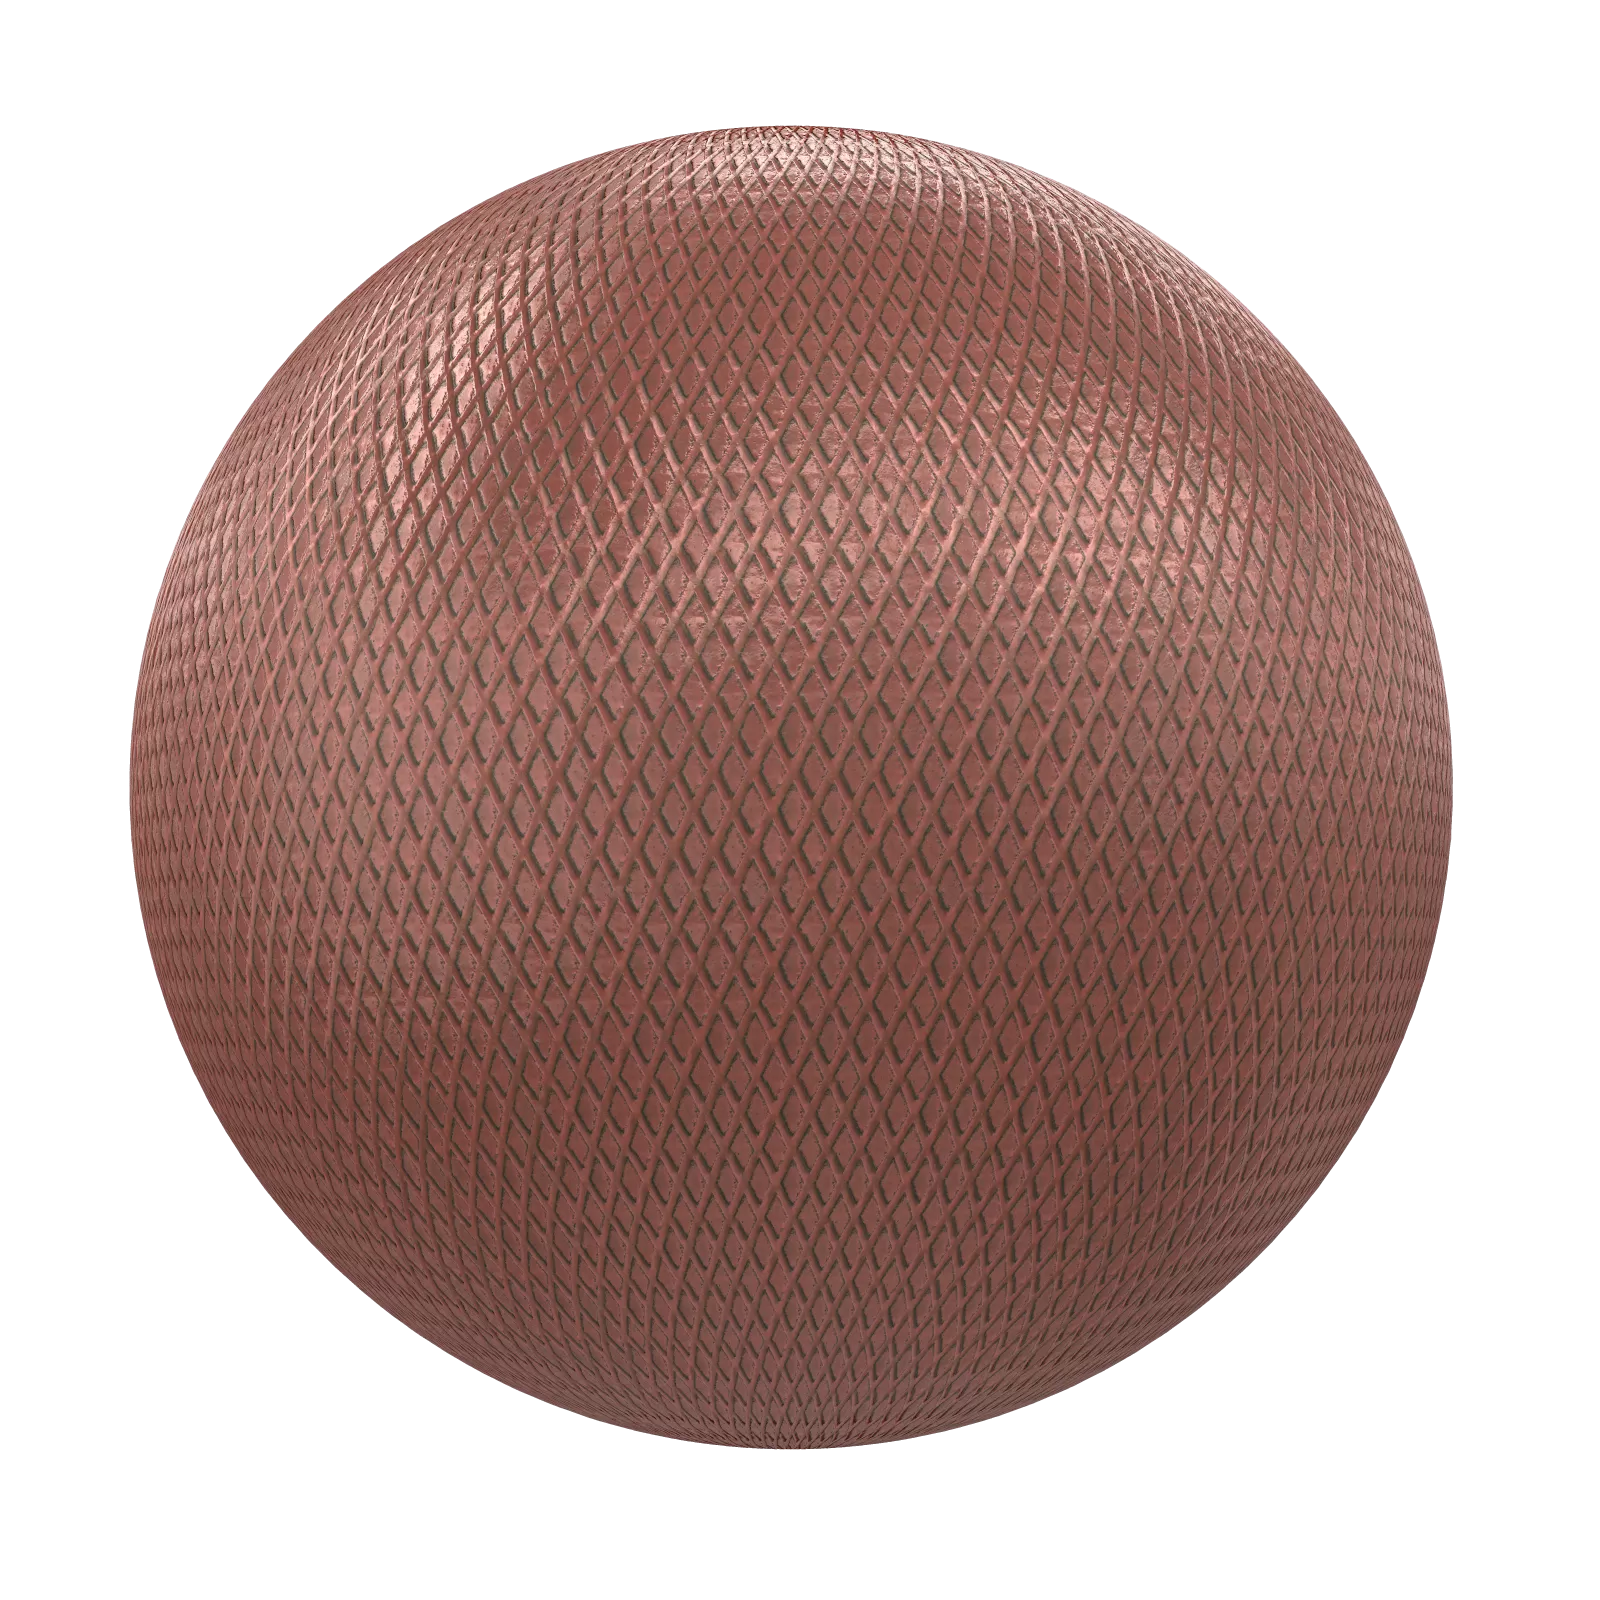 PBR CGAXIS TEXTURES – METALS – Rusty Patterned Metal 01